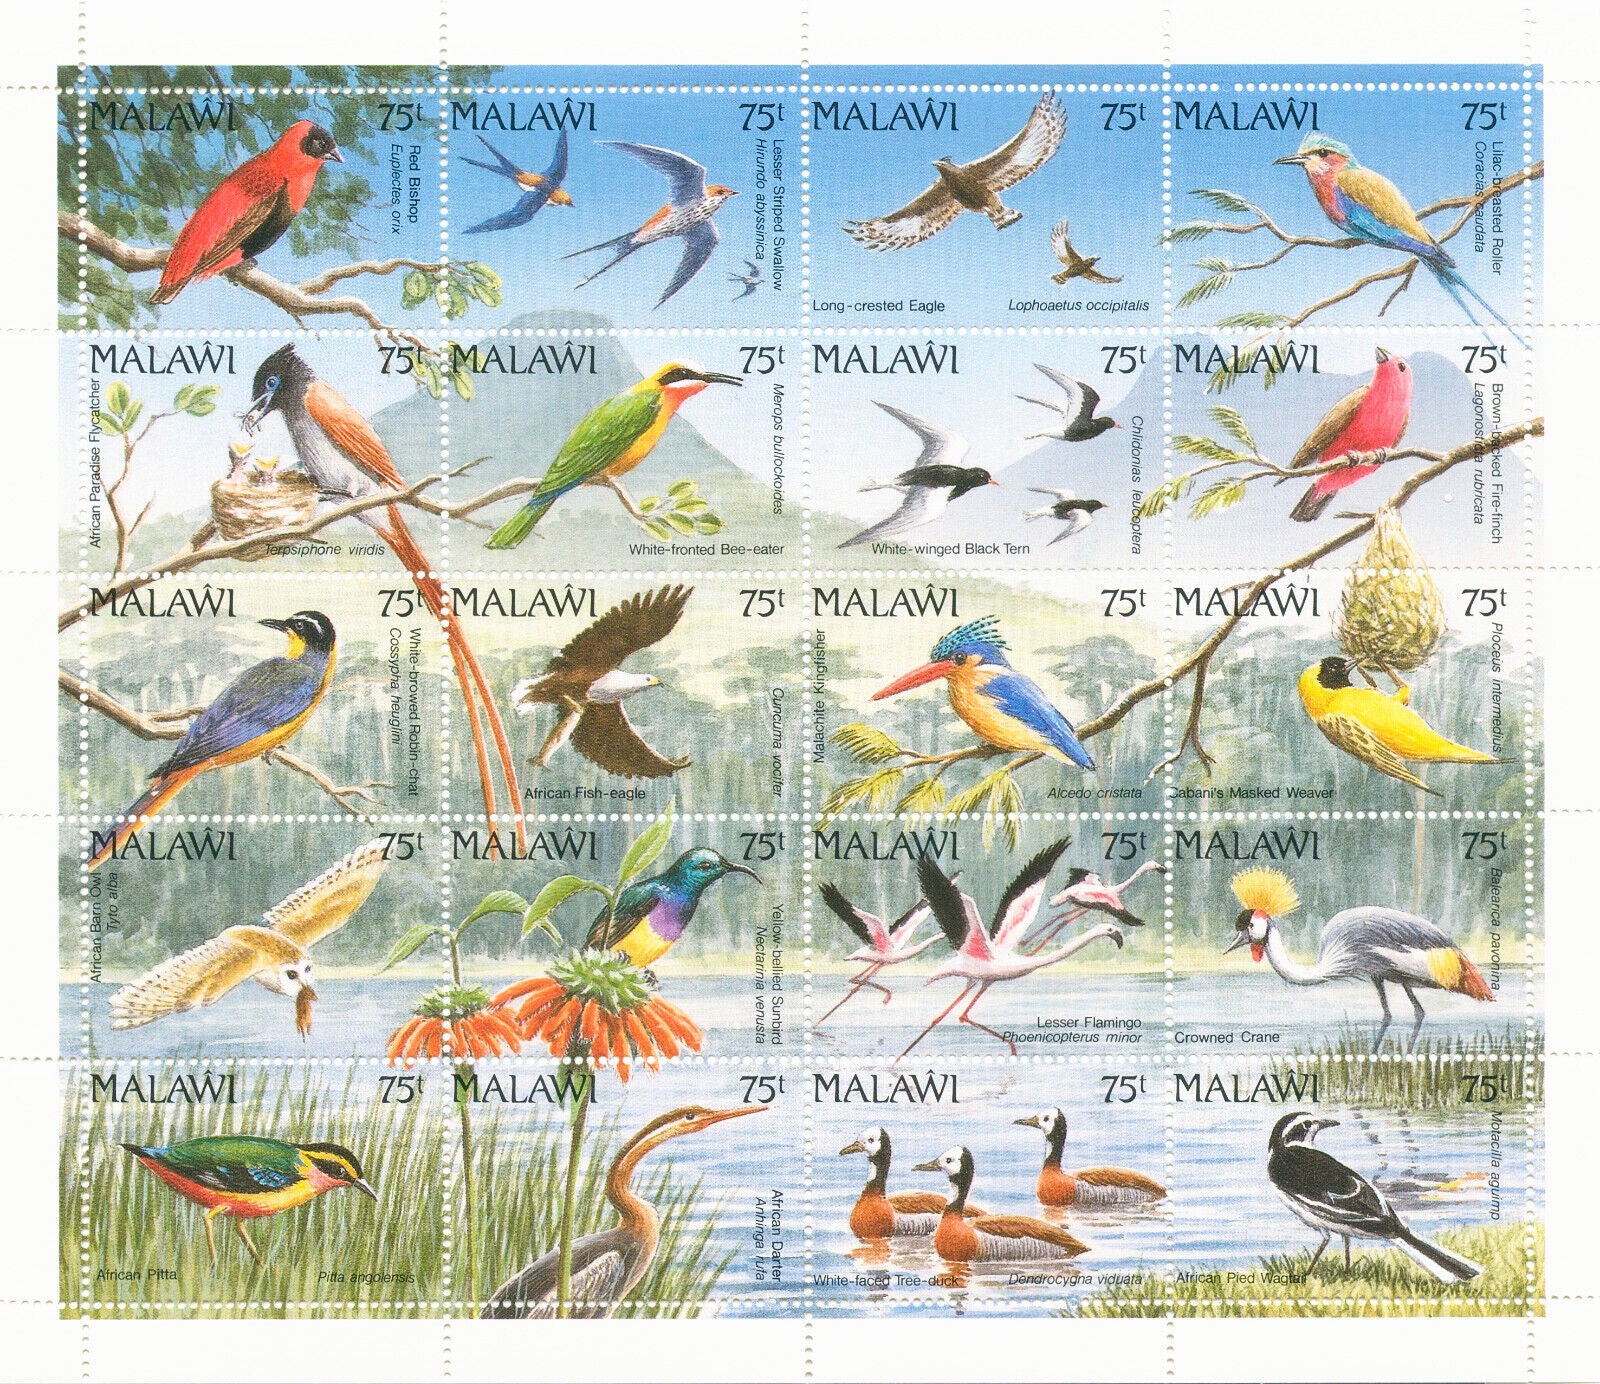 Malawi 1992 MNH Birds on Stamps Ducks Bee-Eaters Kingfishers Cranes Owls 20v M/S